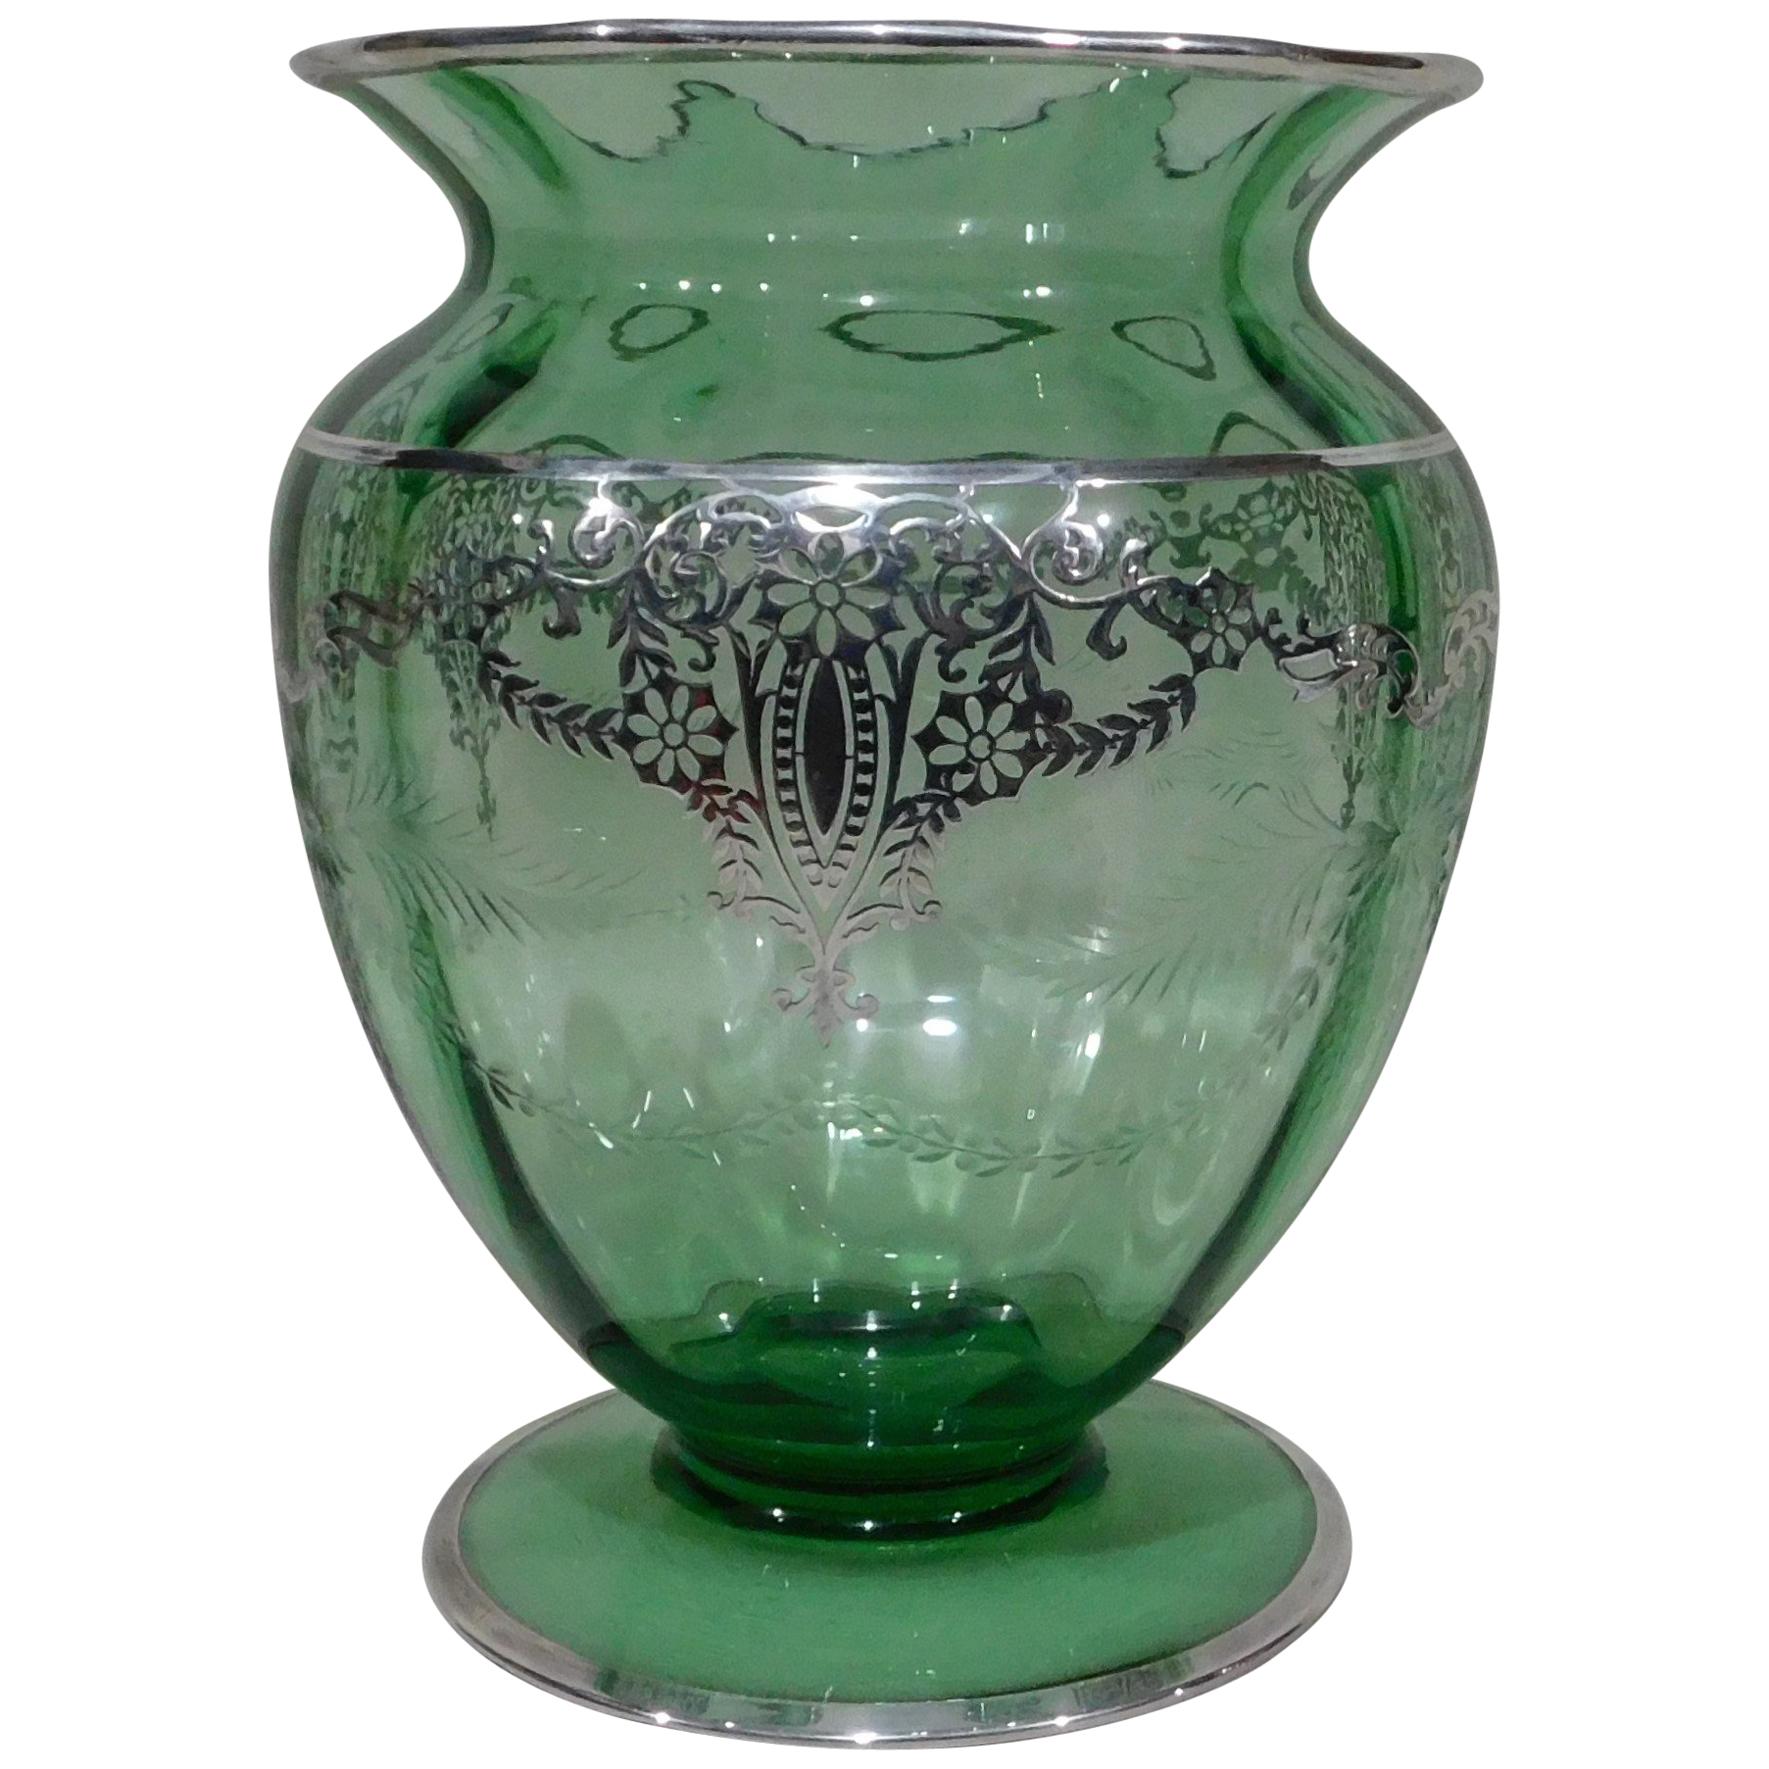 American Wheeled Cut Green Glass Vase With Silver Overlay Circa 1920s For Sale At 1stdibs